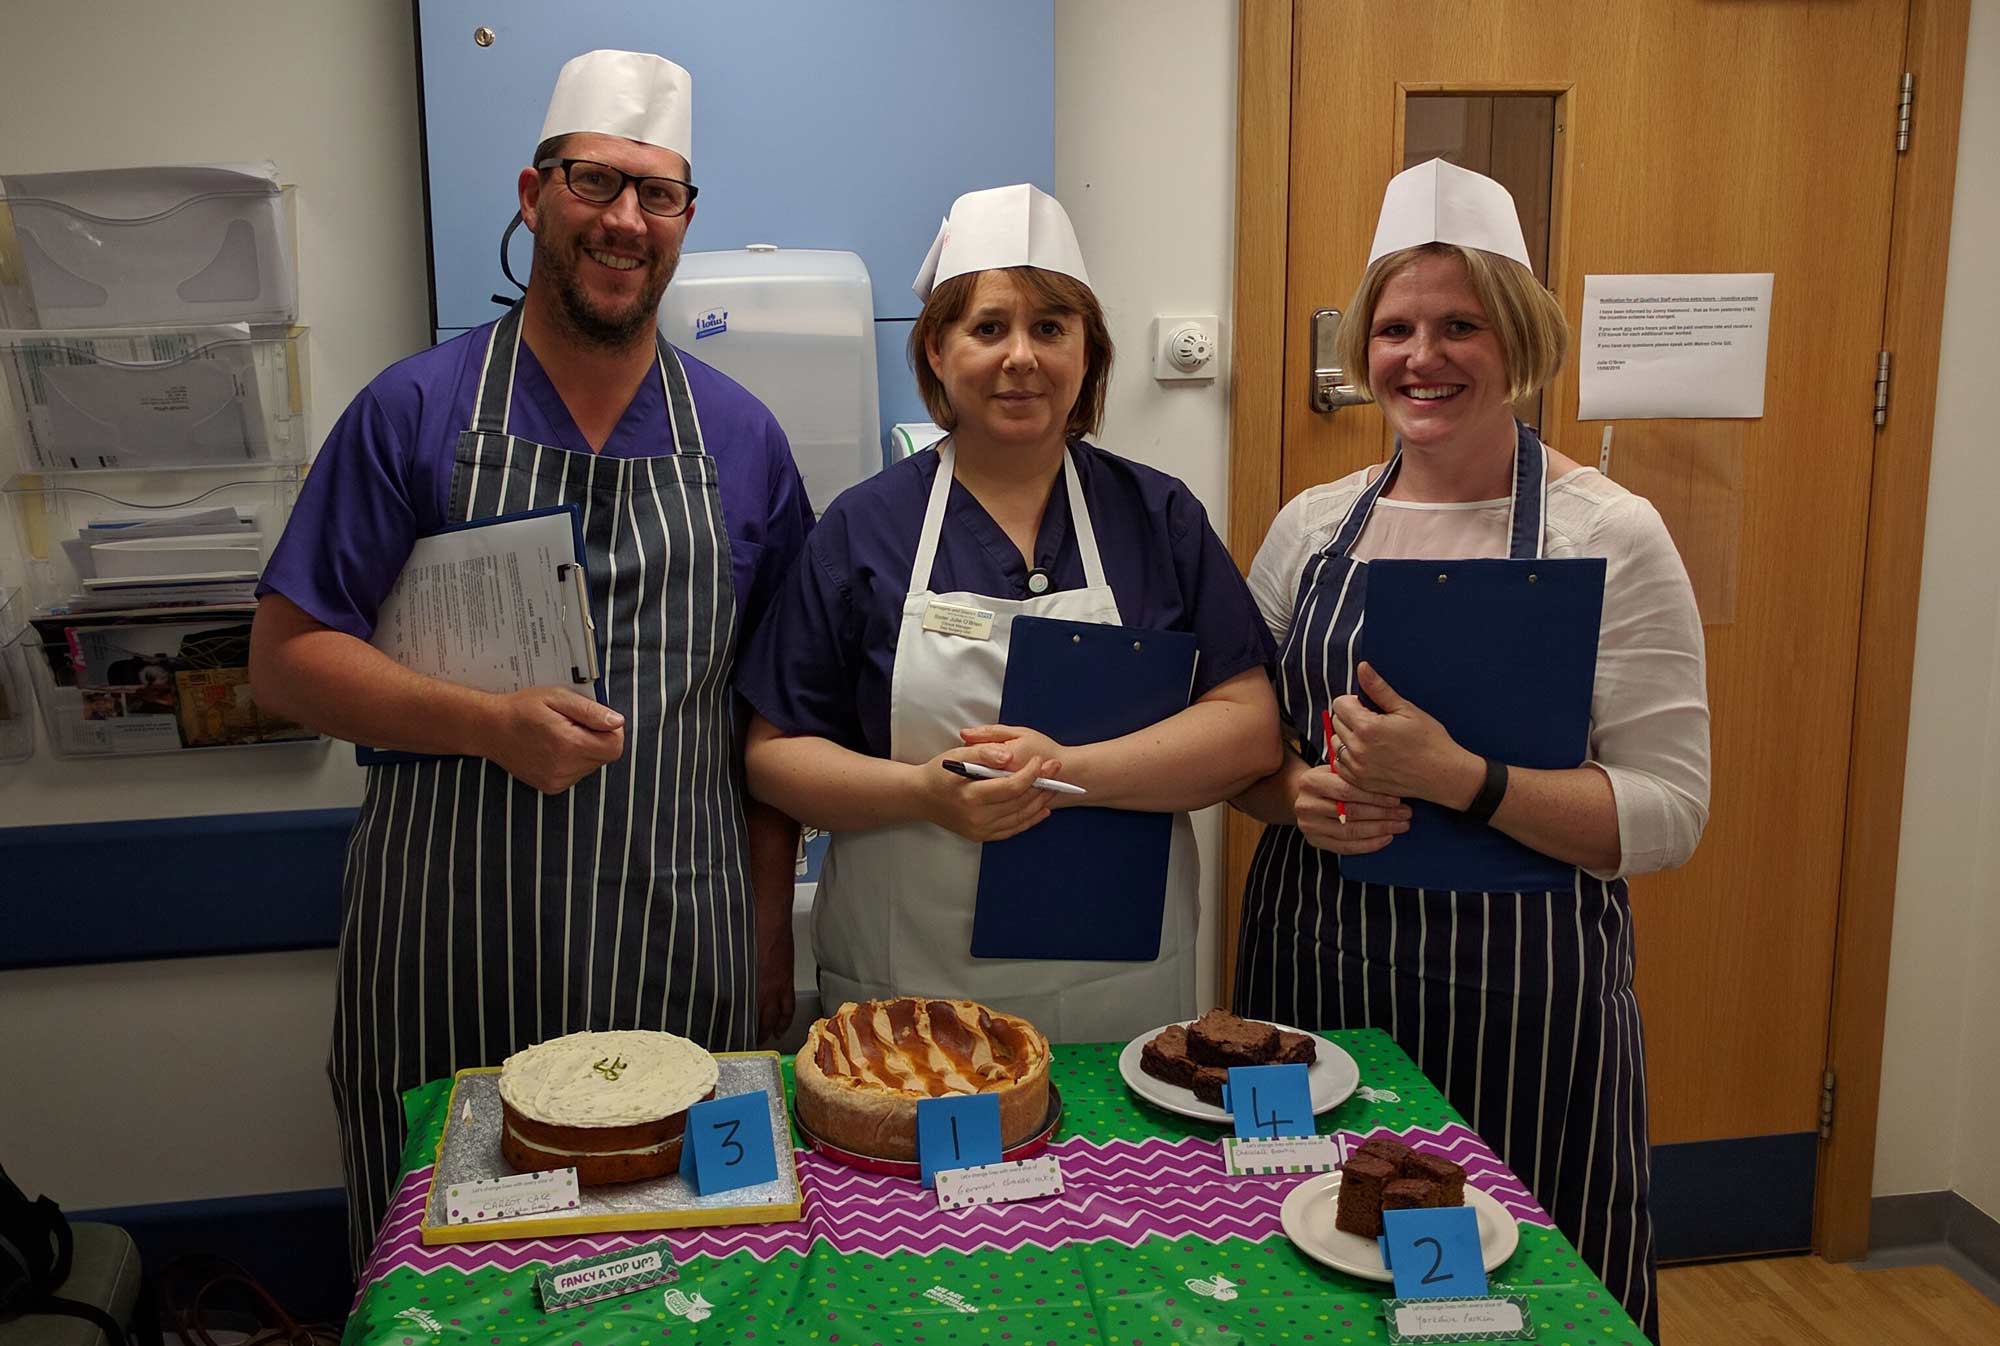 Sampling the delights - Staff play the part of Bake Off judges in best cake competition